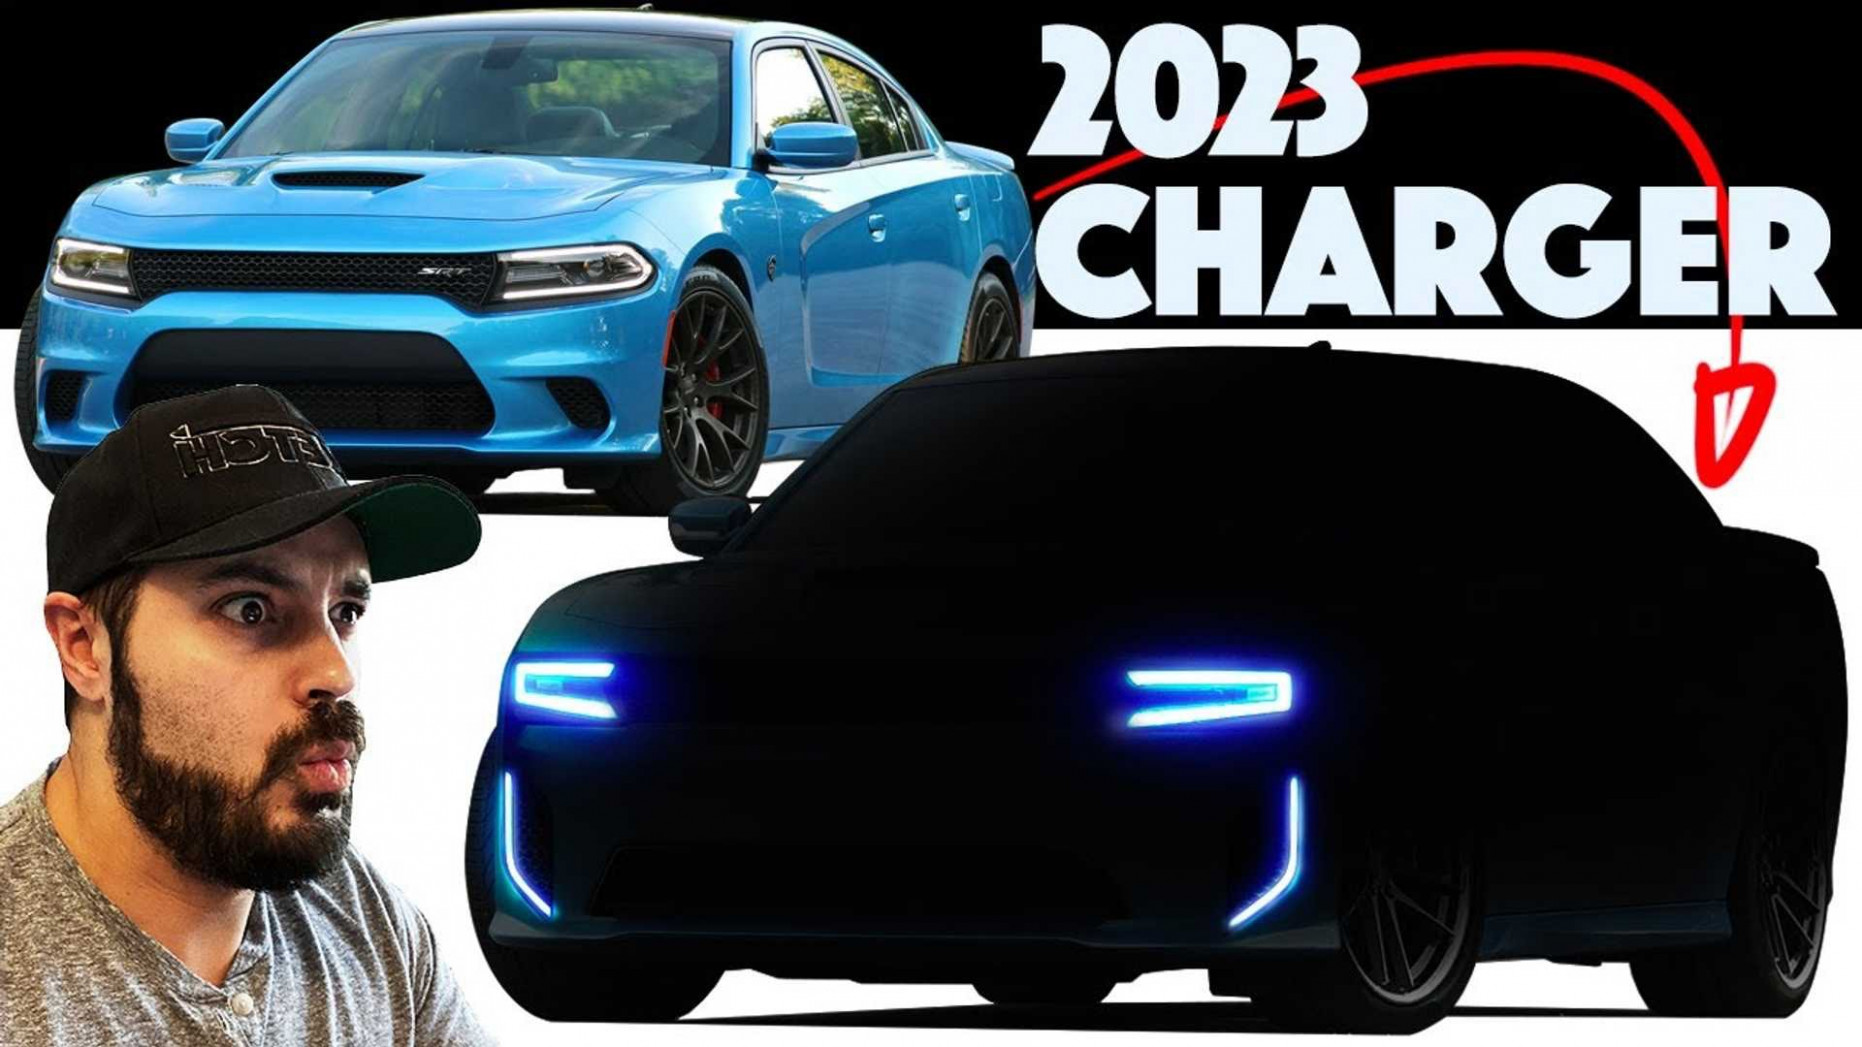 Redesign New Dodge Cars For 2023